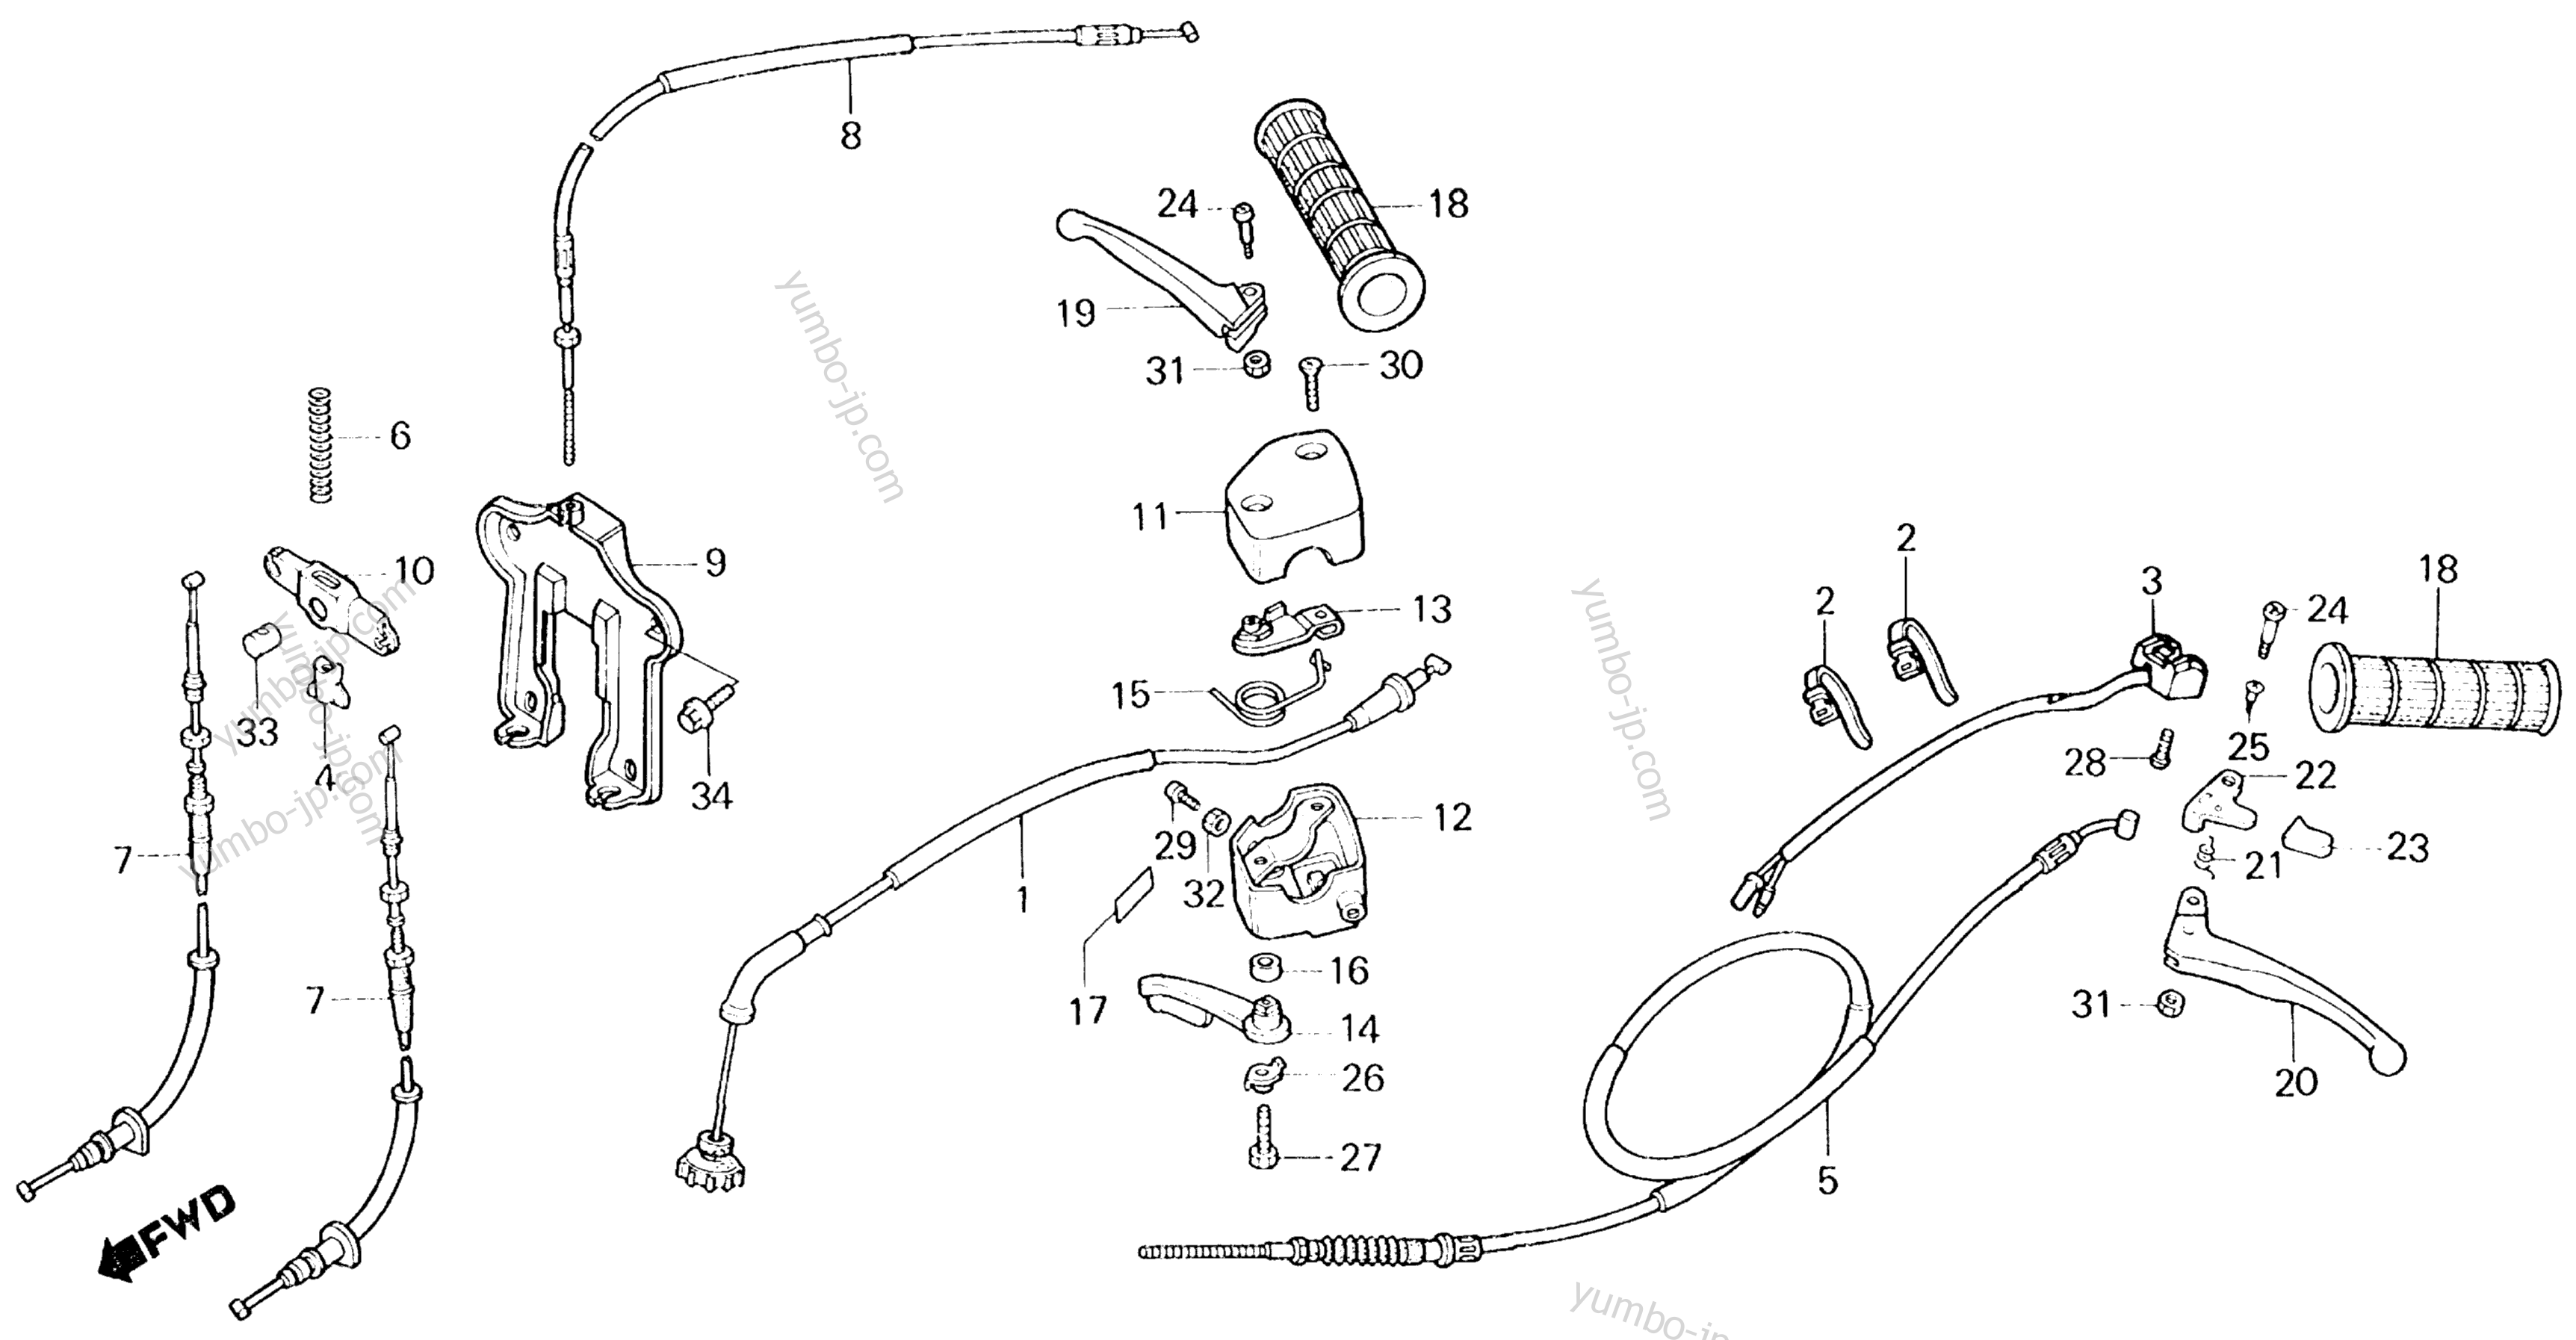 HANDLE LEVER / SWITCH / CABLE for ATVs HONDA TRX70 A 1987 year